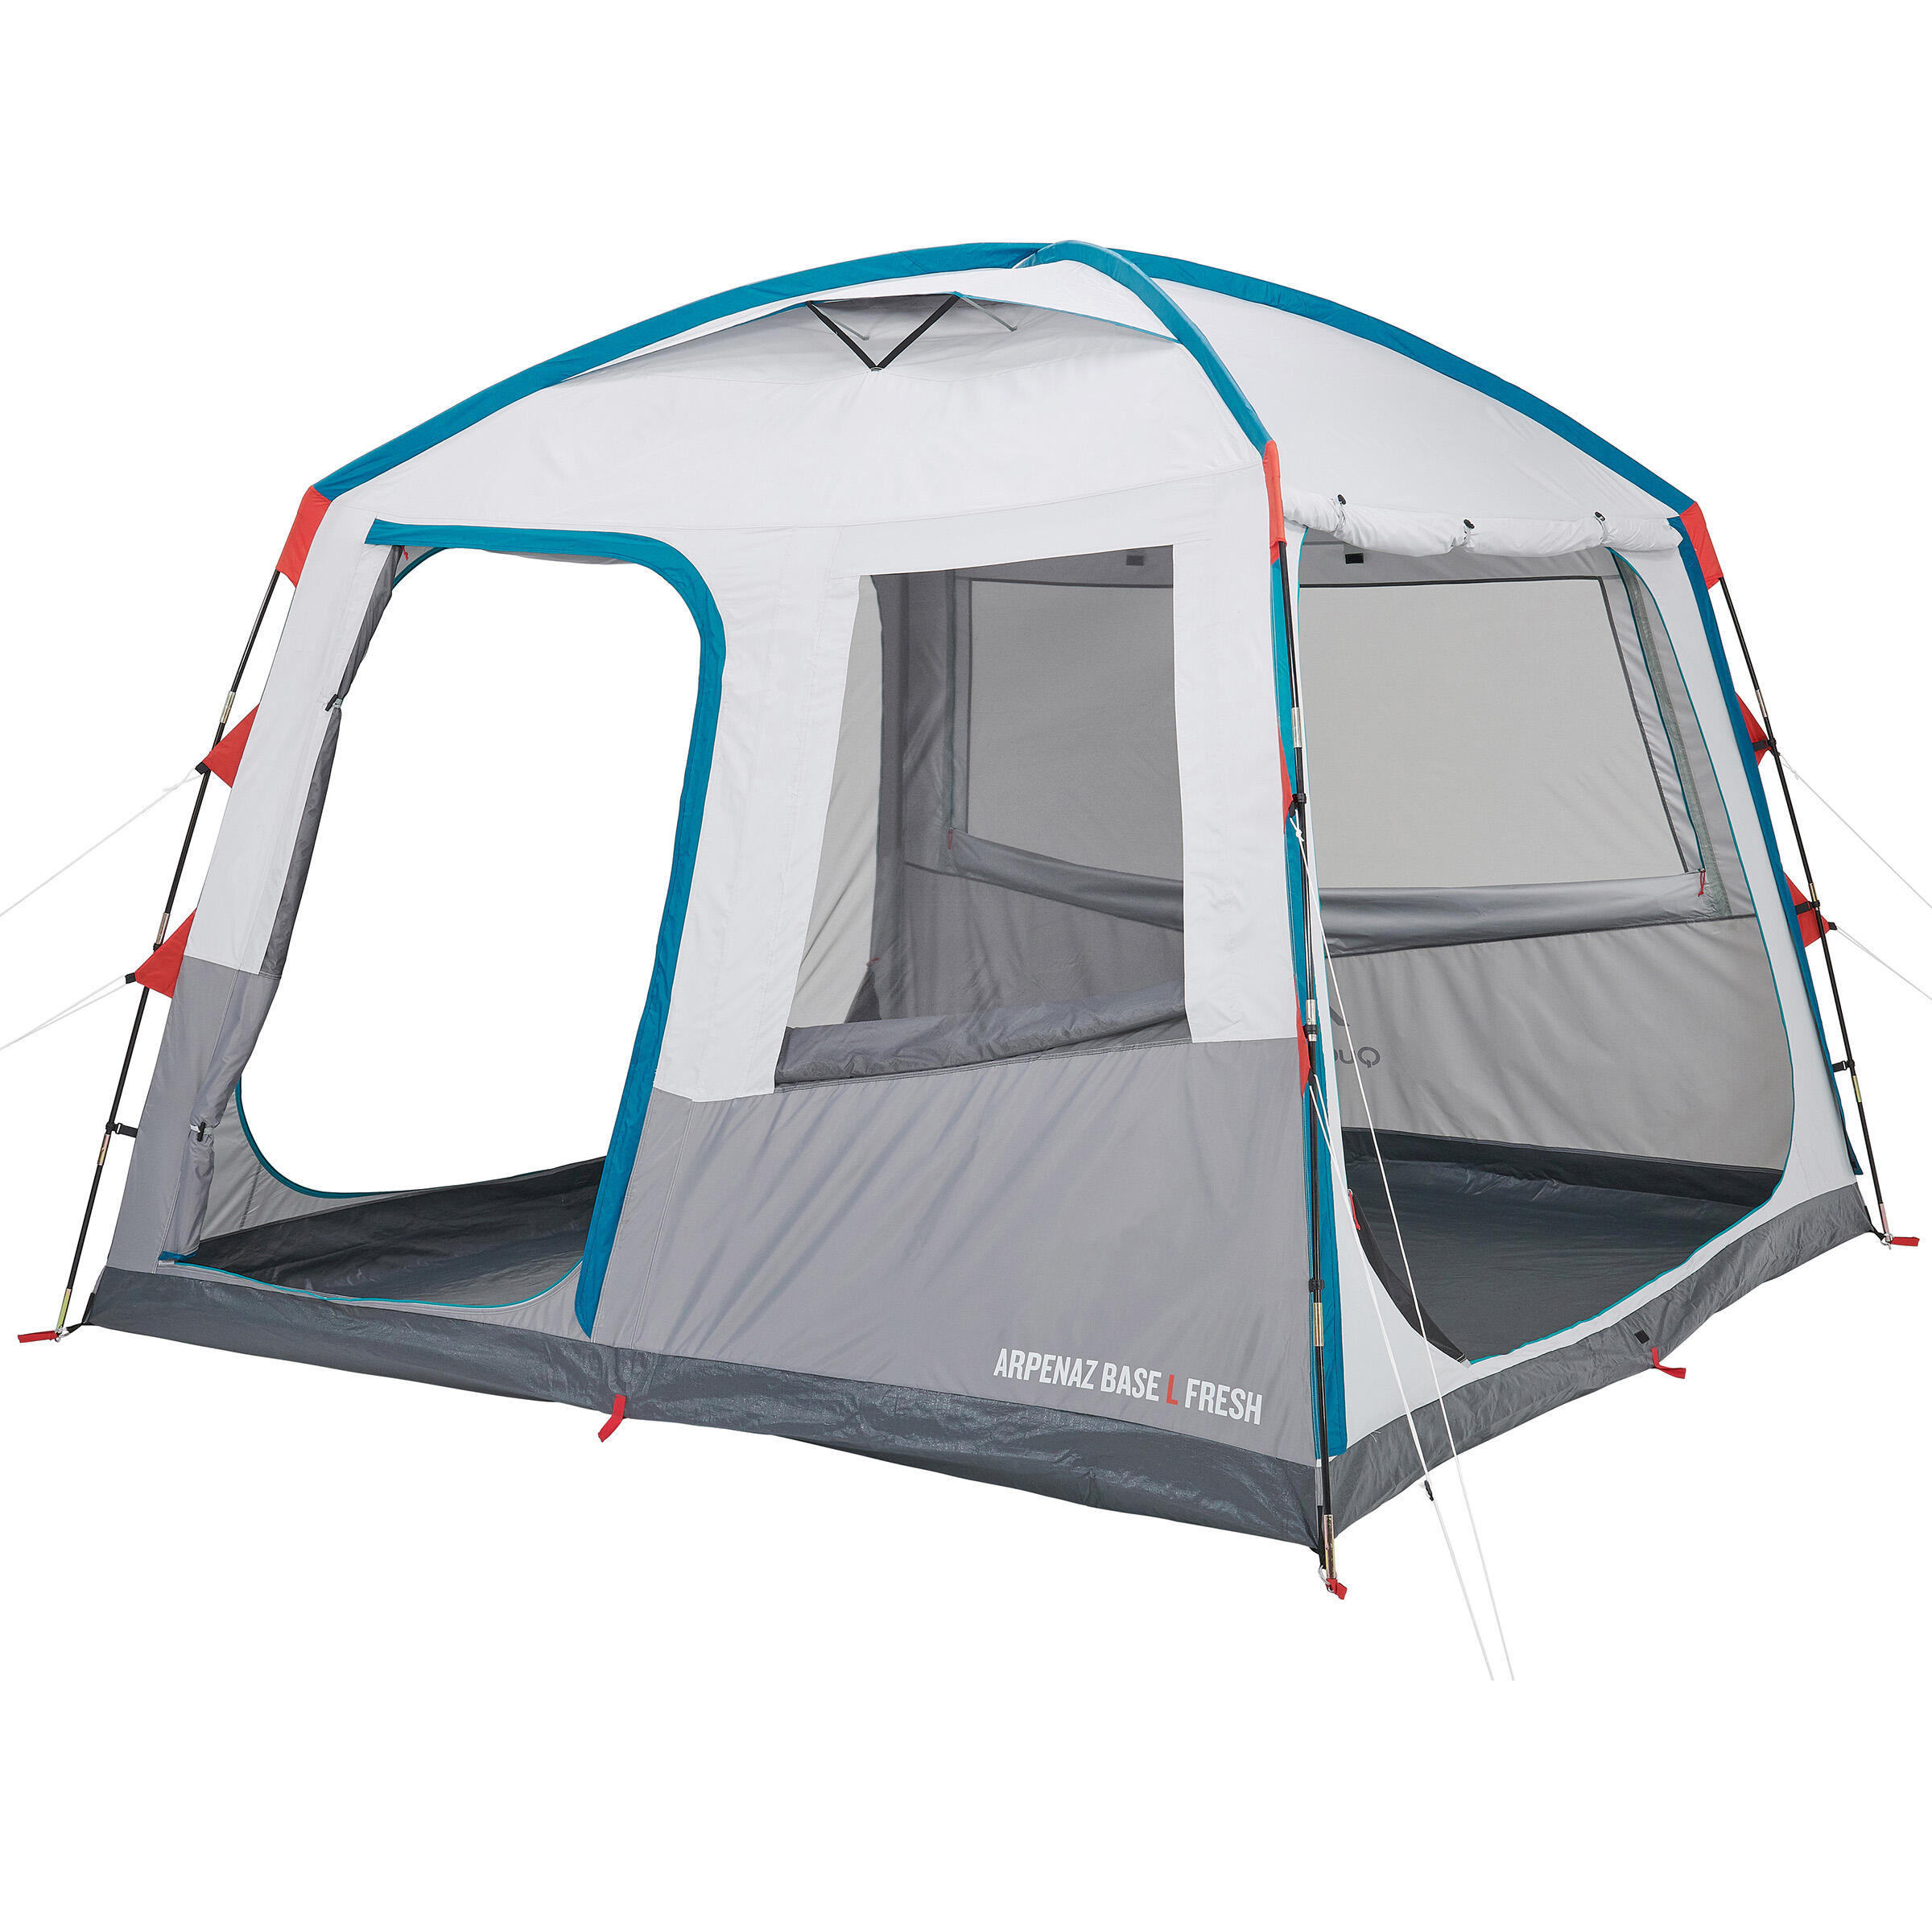 Buy Camping Base 10 person tent online 